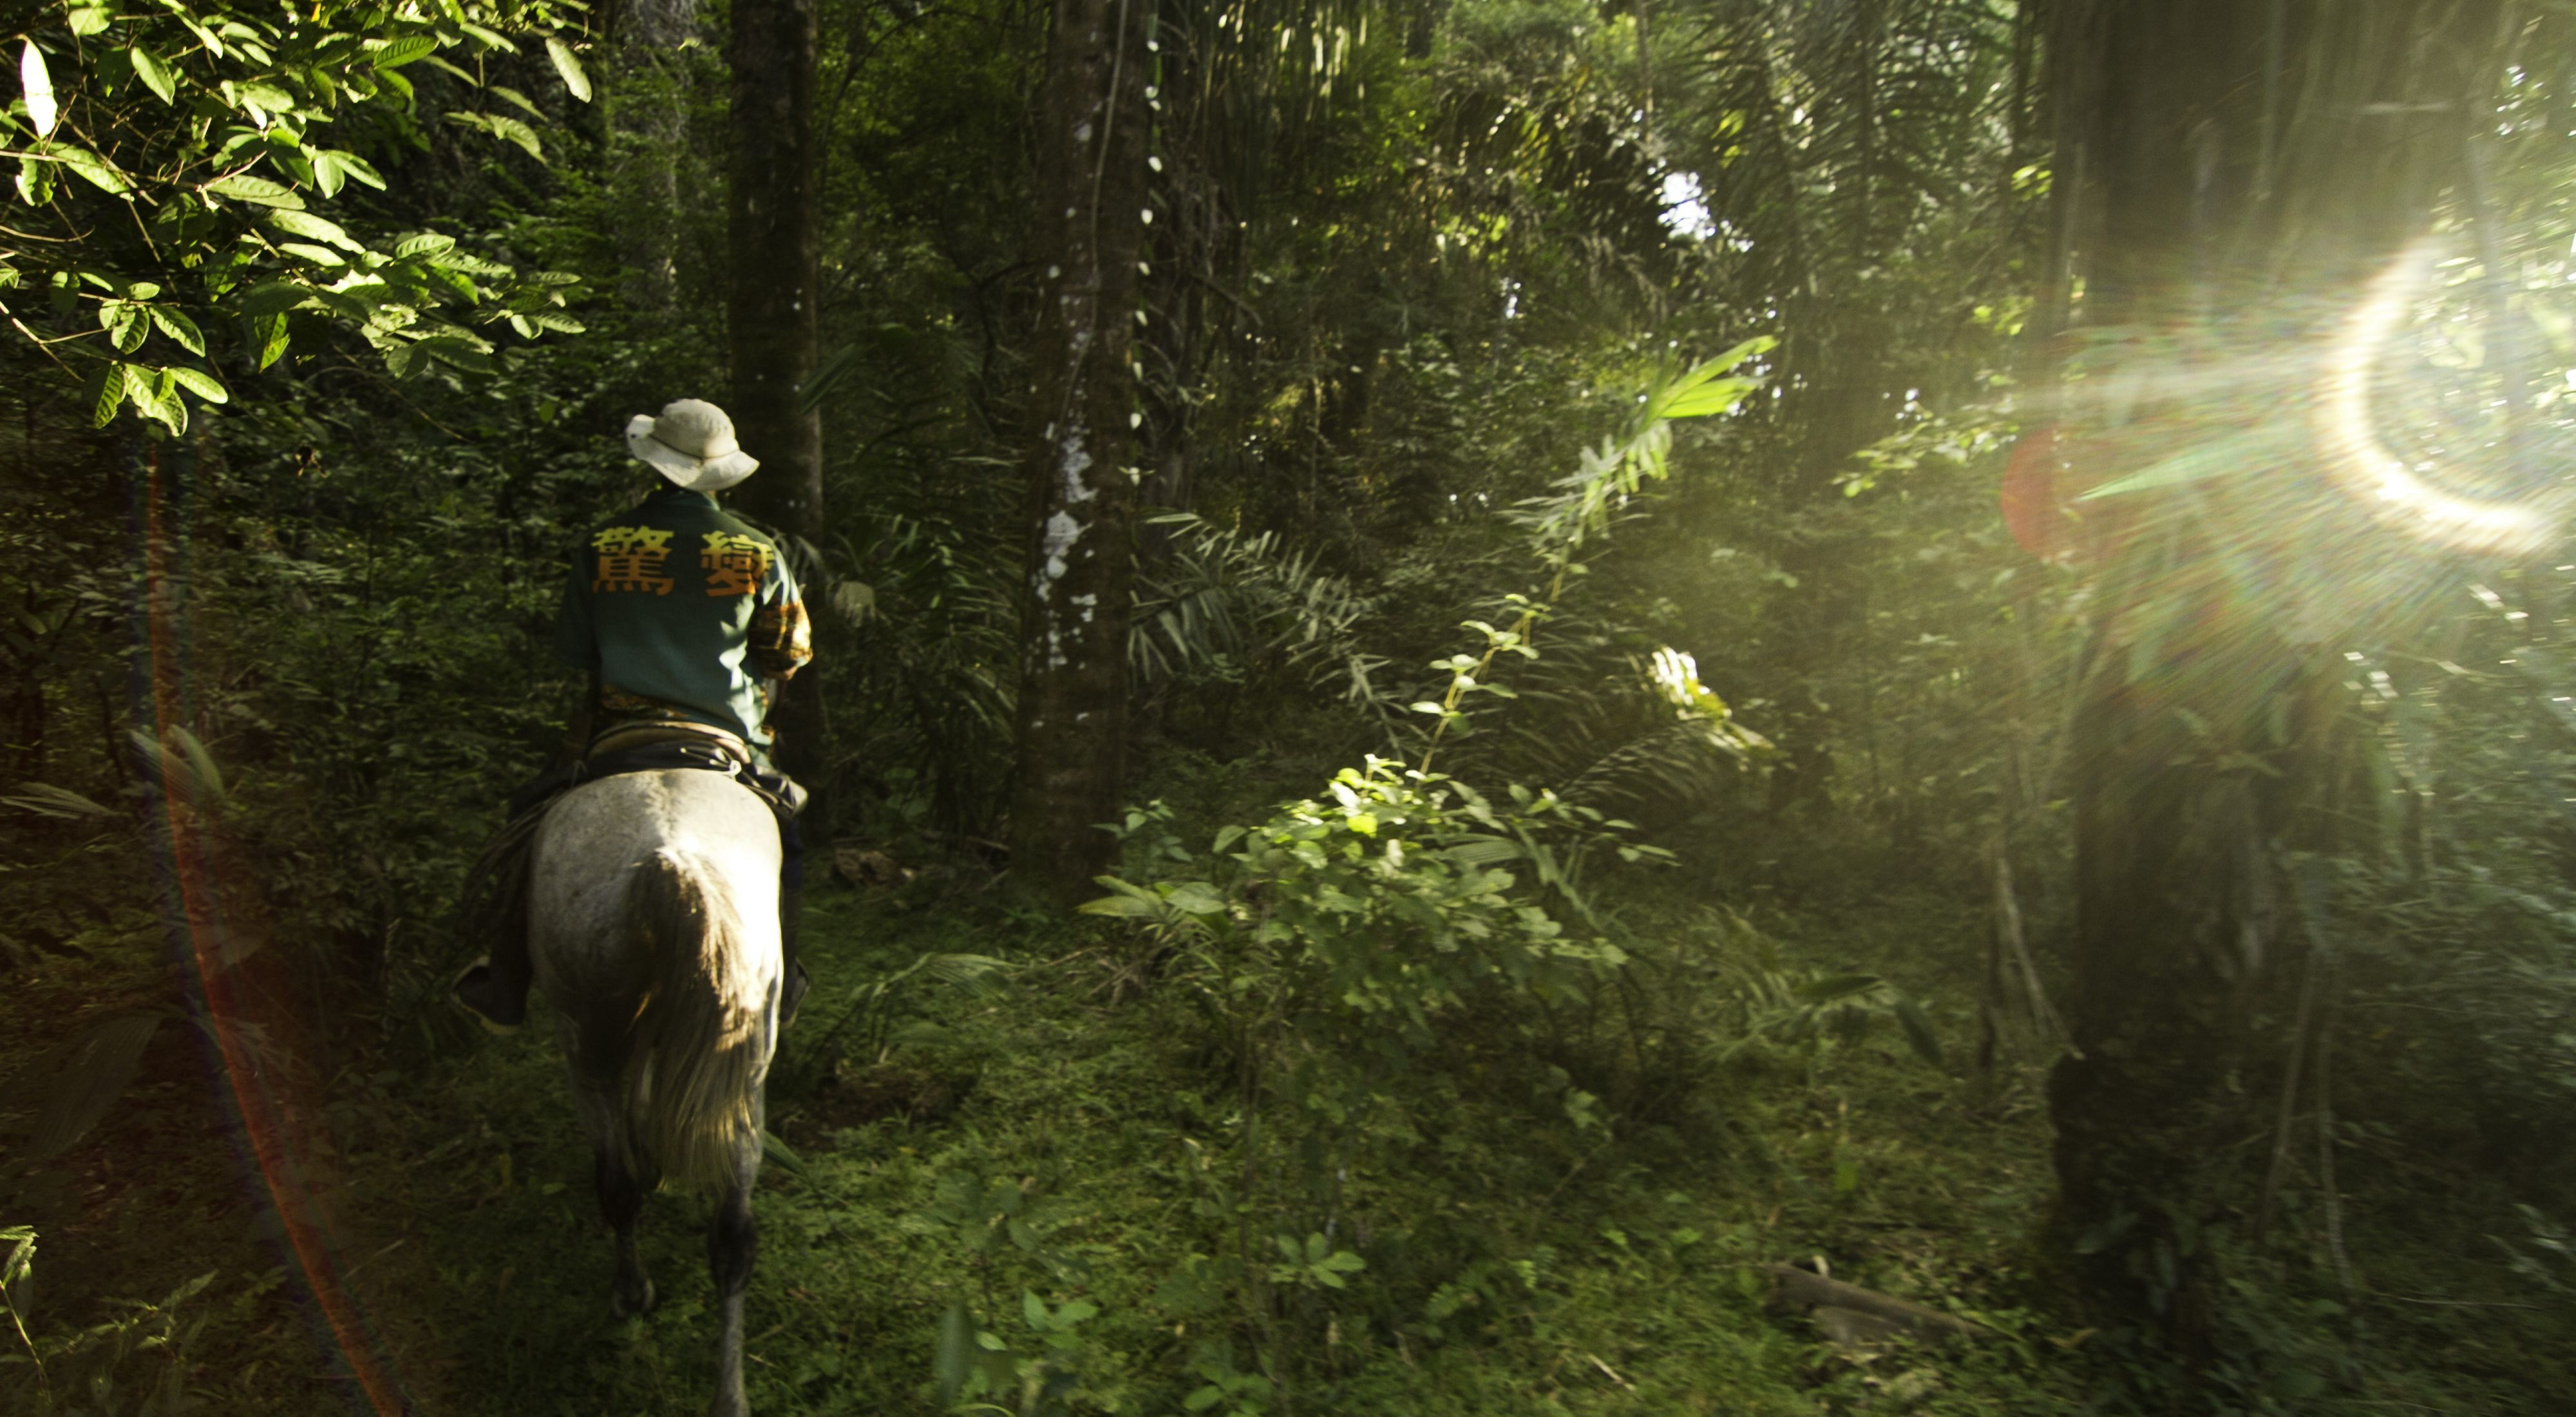 Someone riding away on a horse in a wooded forest.